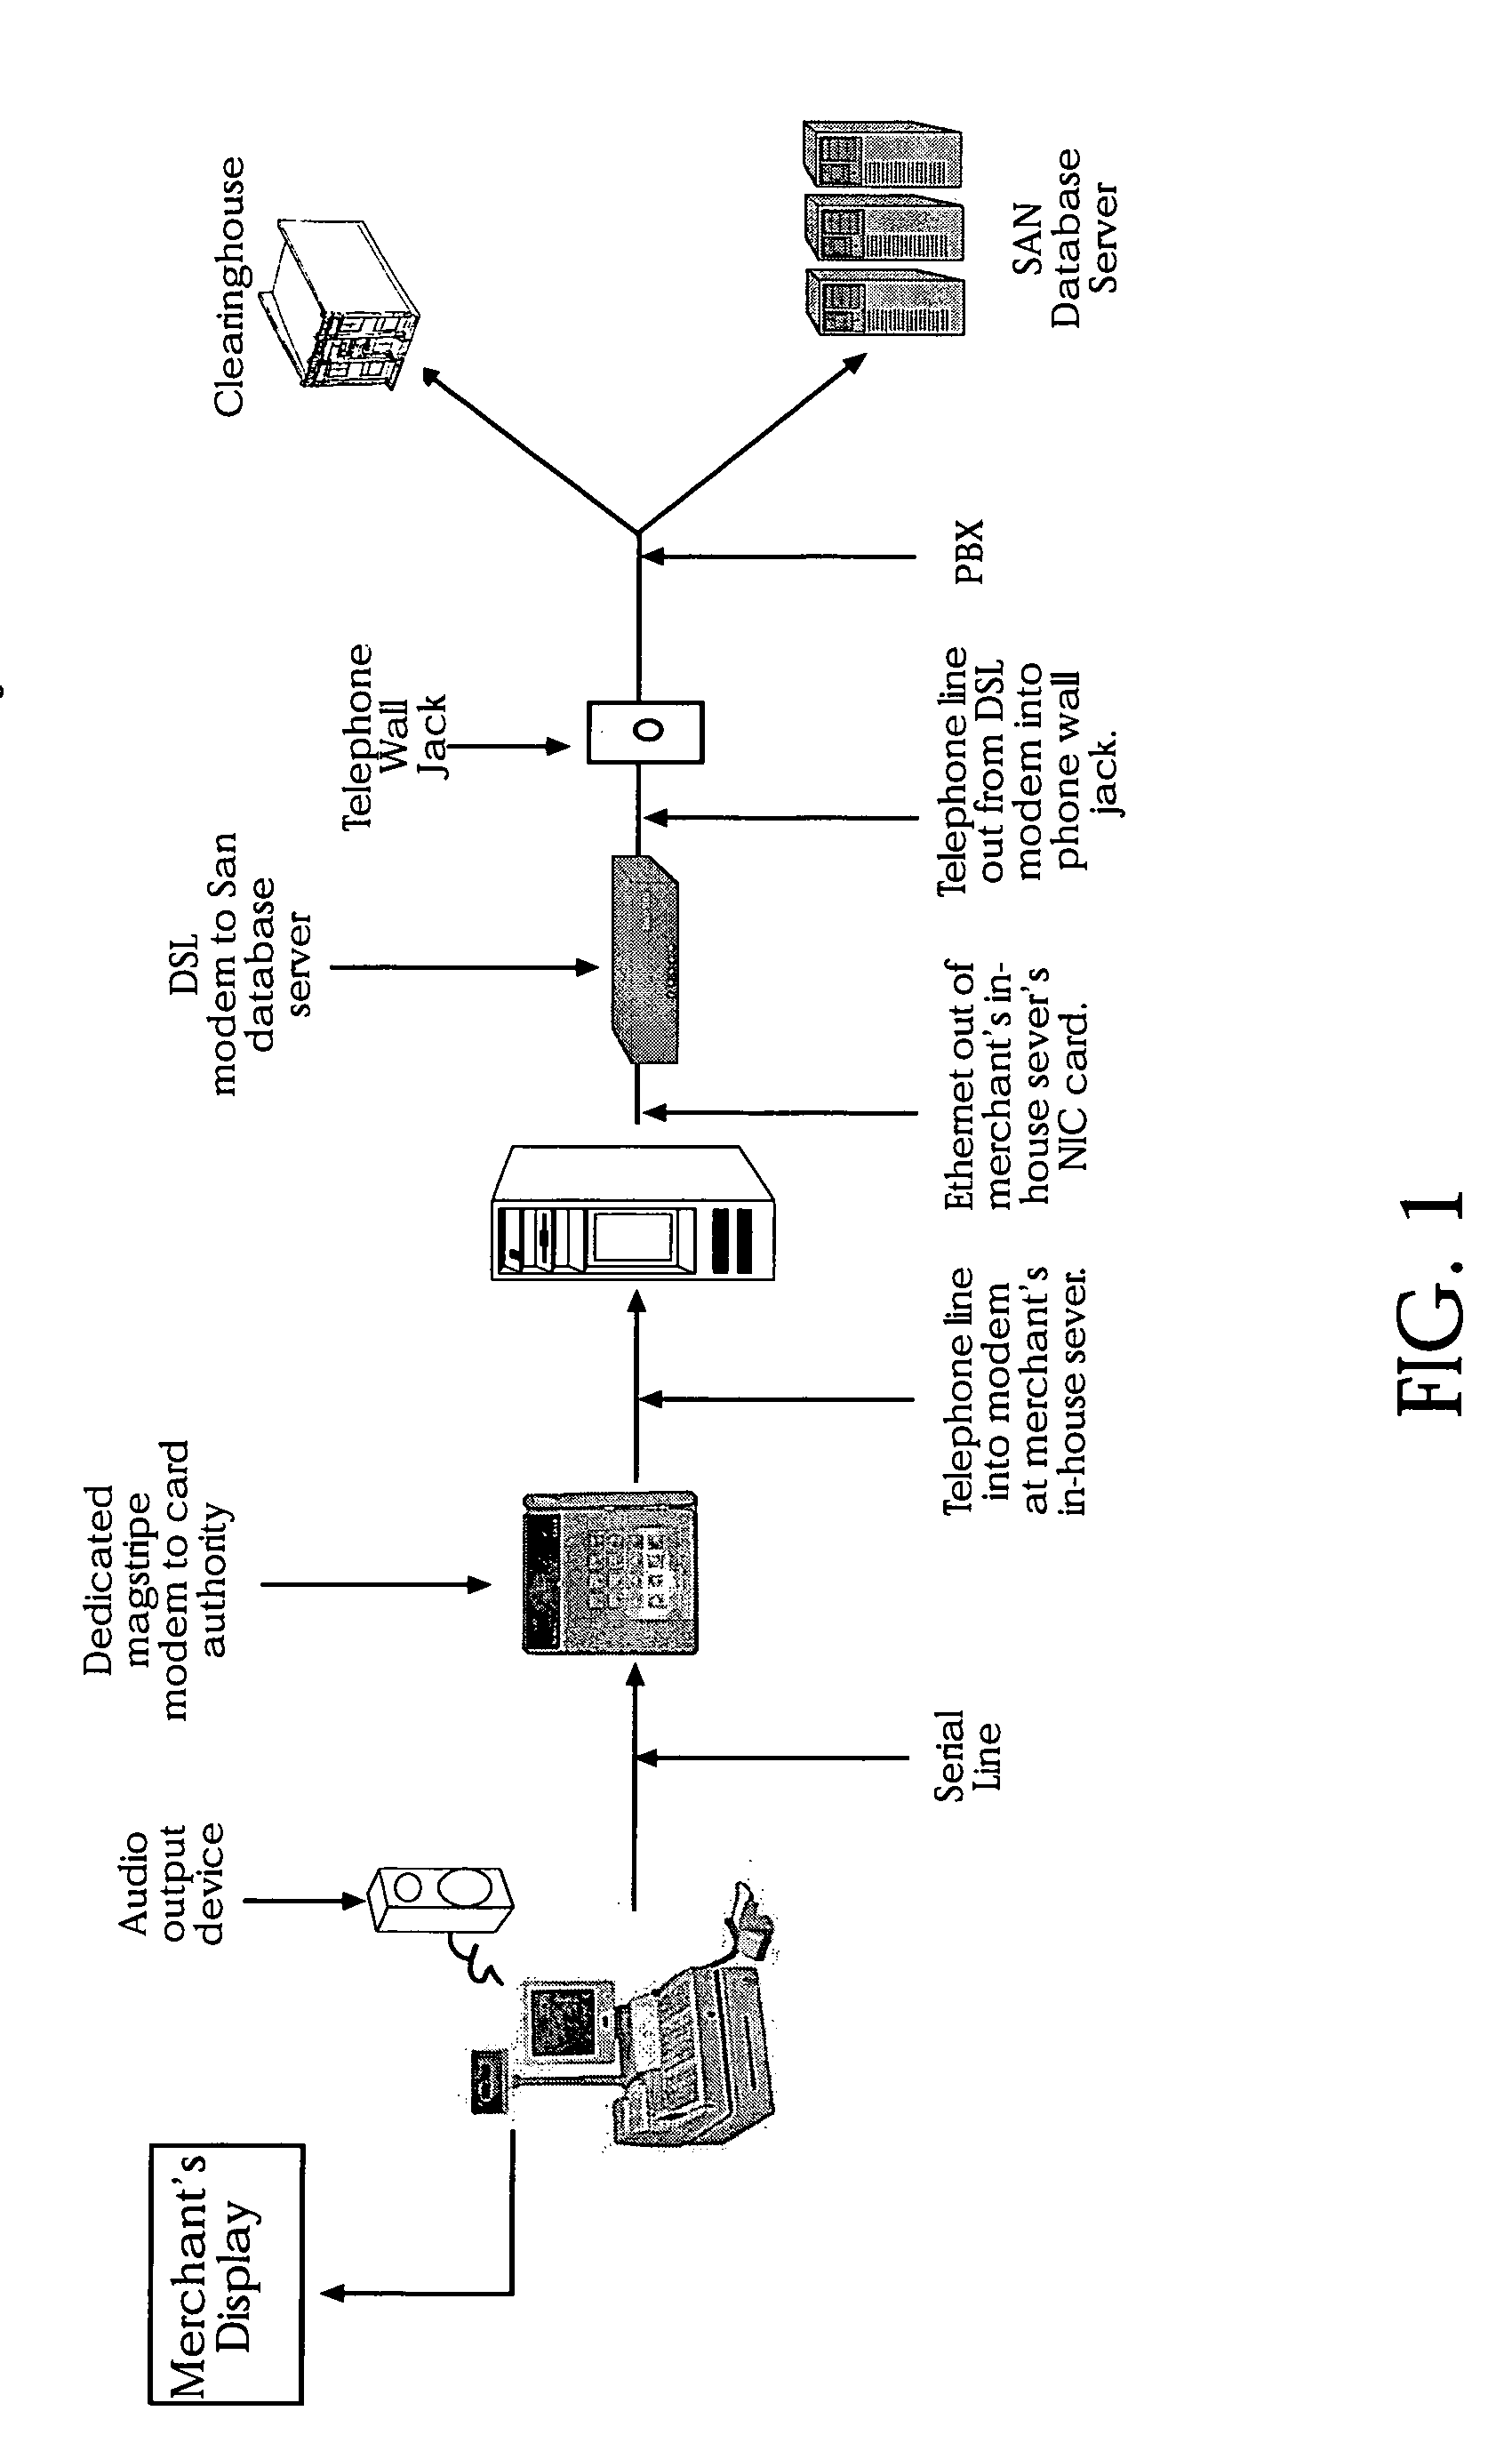 System and method for customer video authentication to prevent identity theft